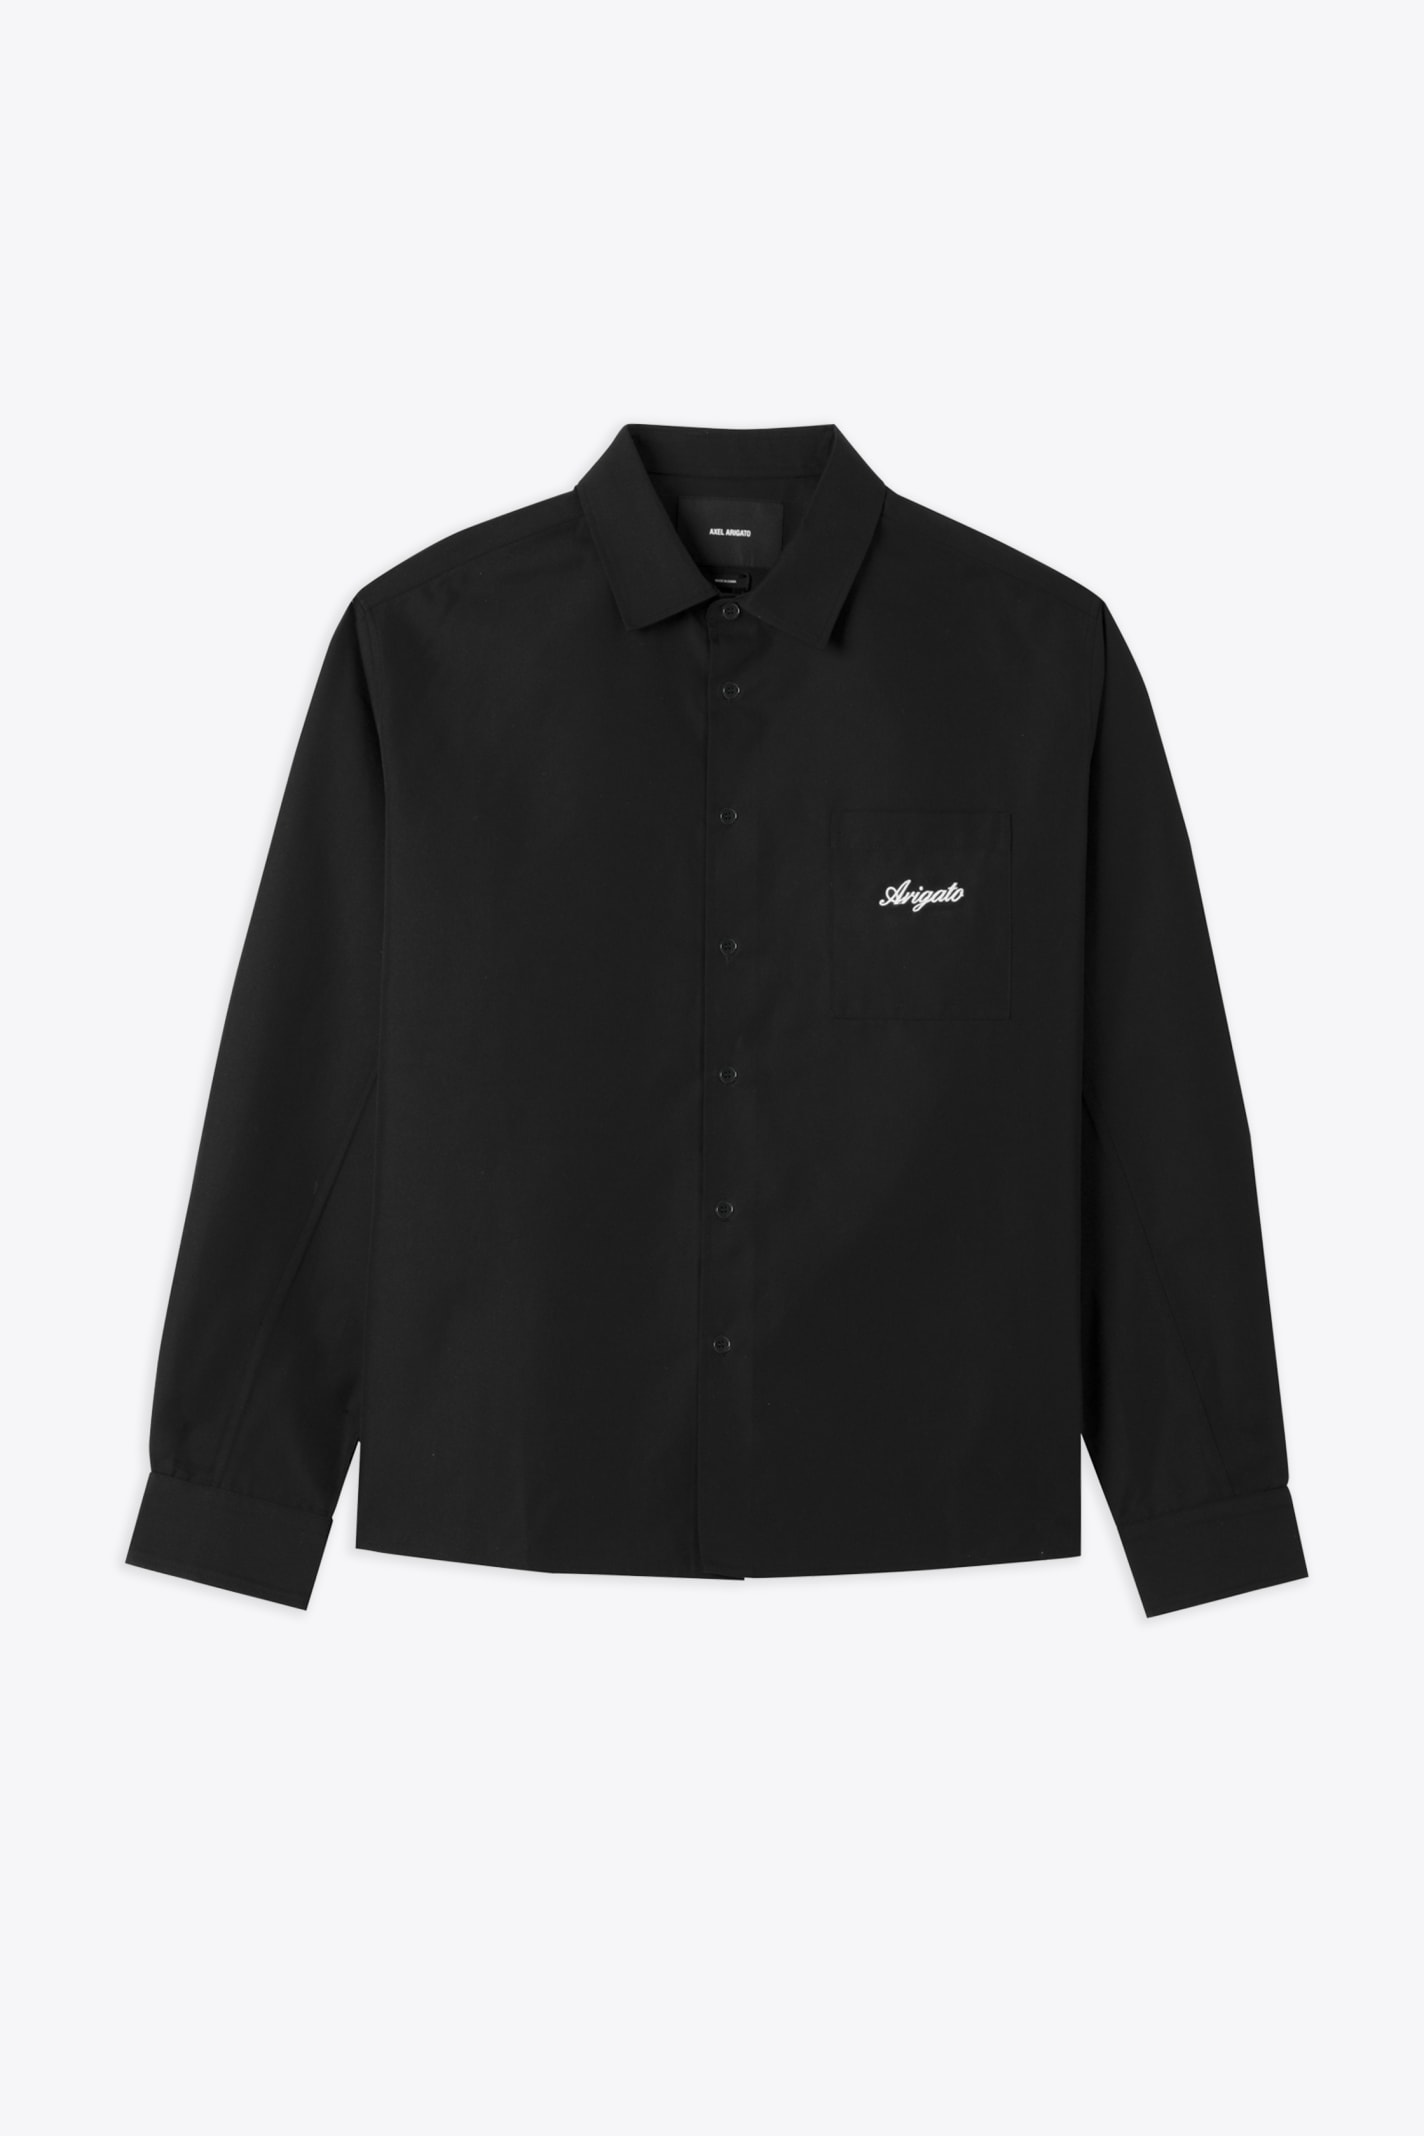 Flow Overshirt Black shirt with chest pocket and logo - Flow overshirt